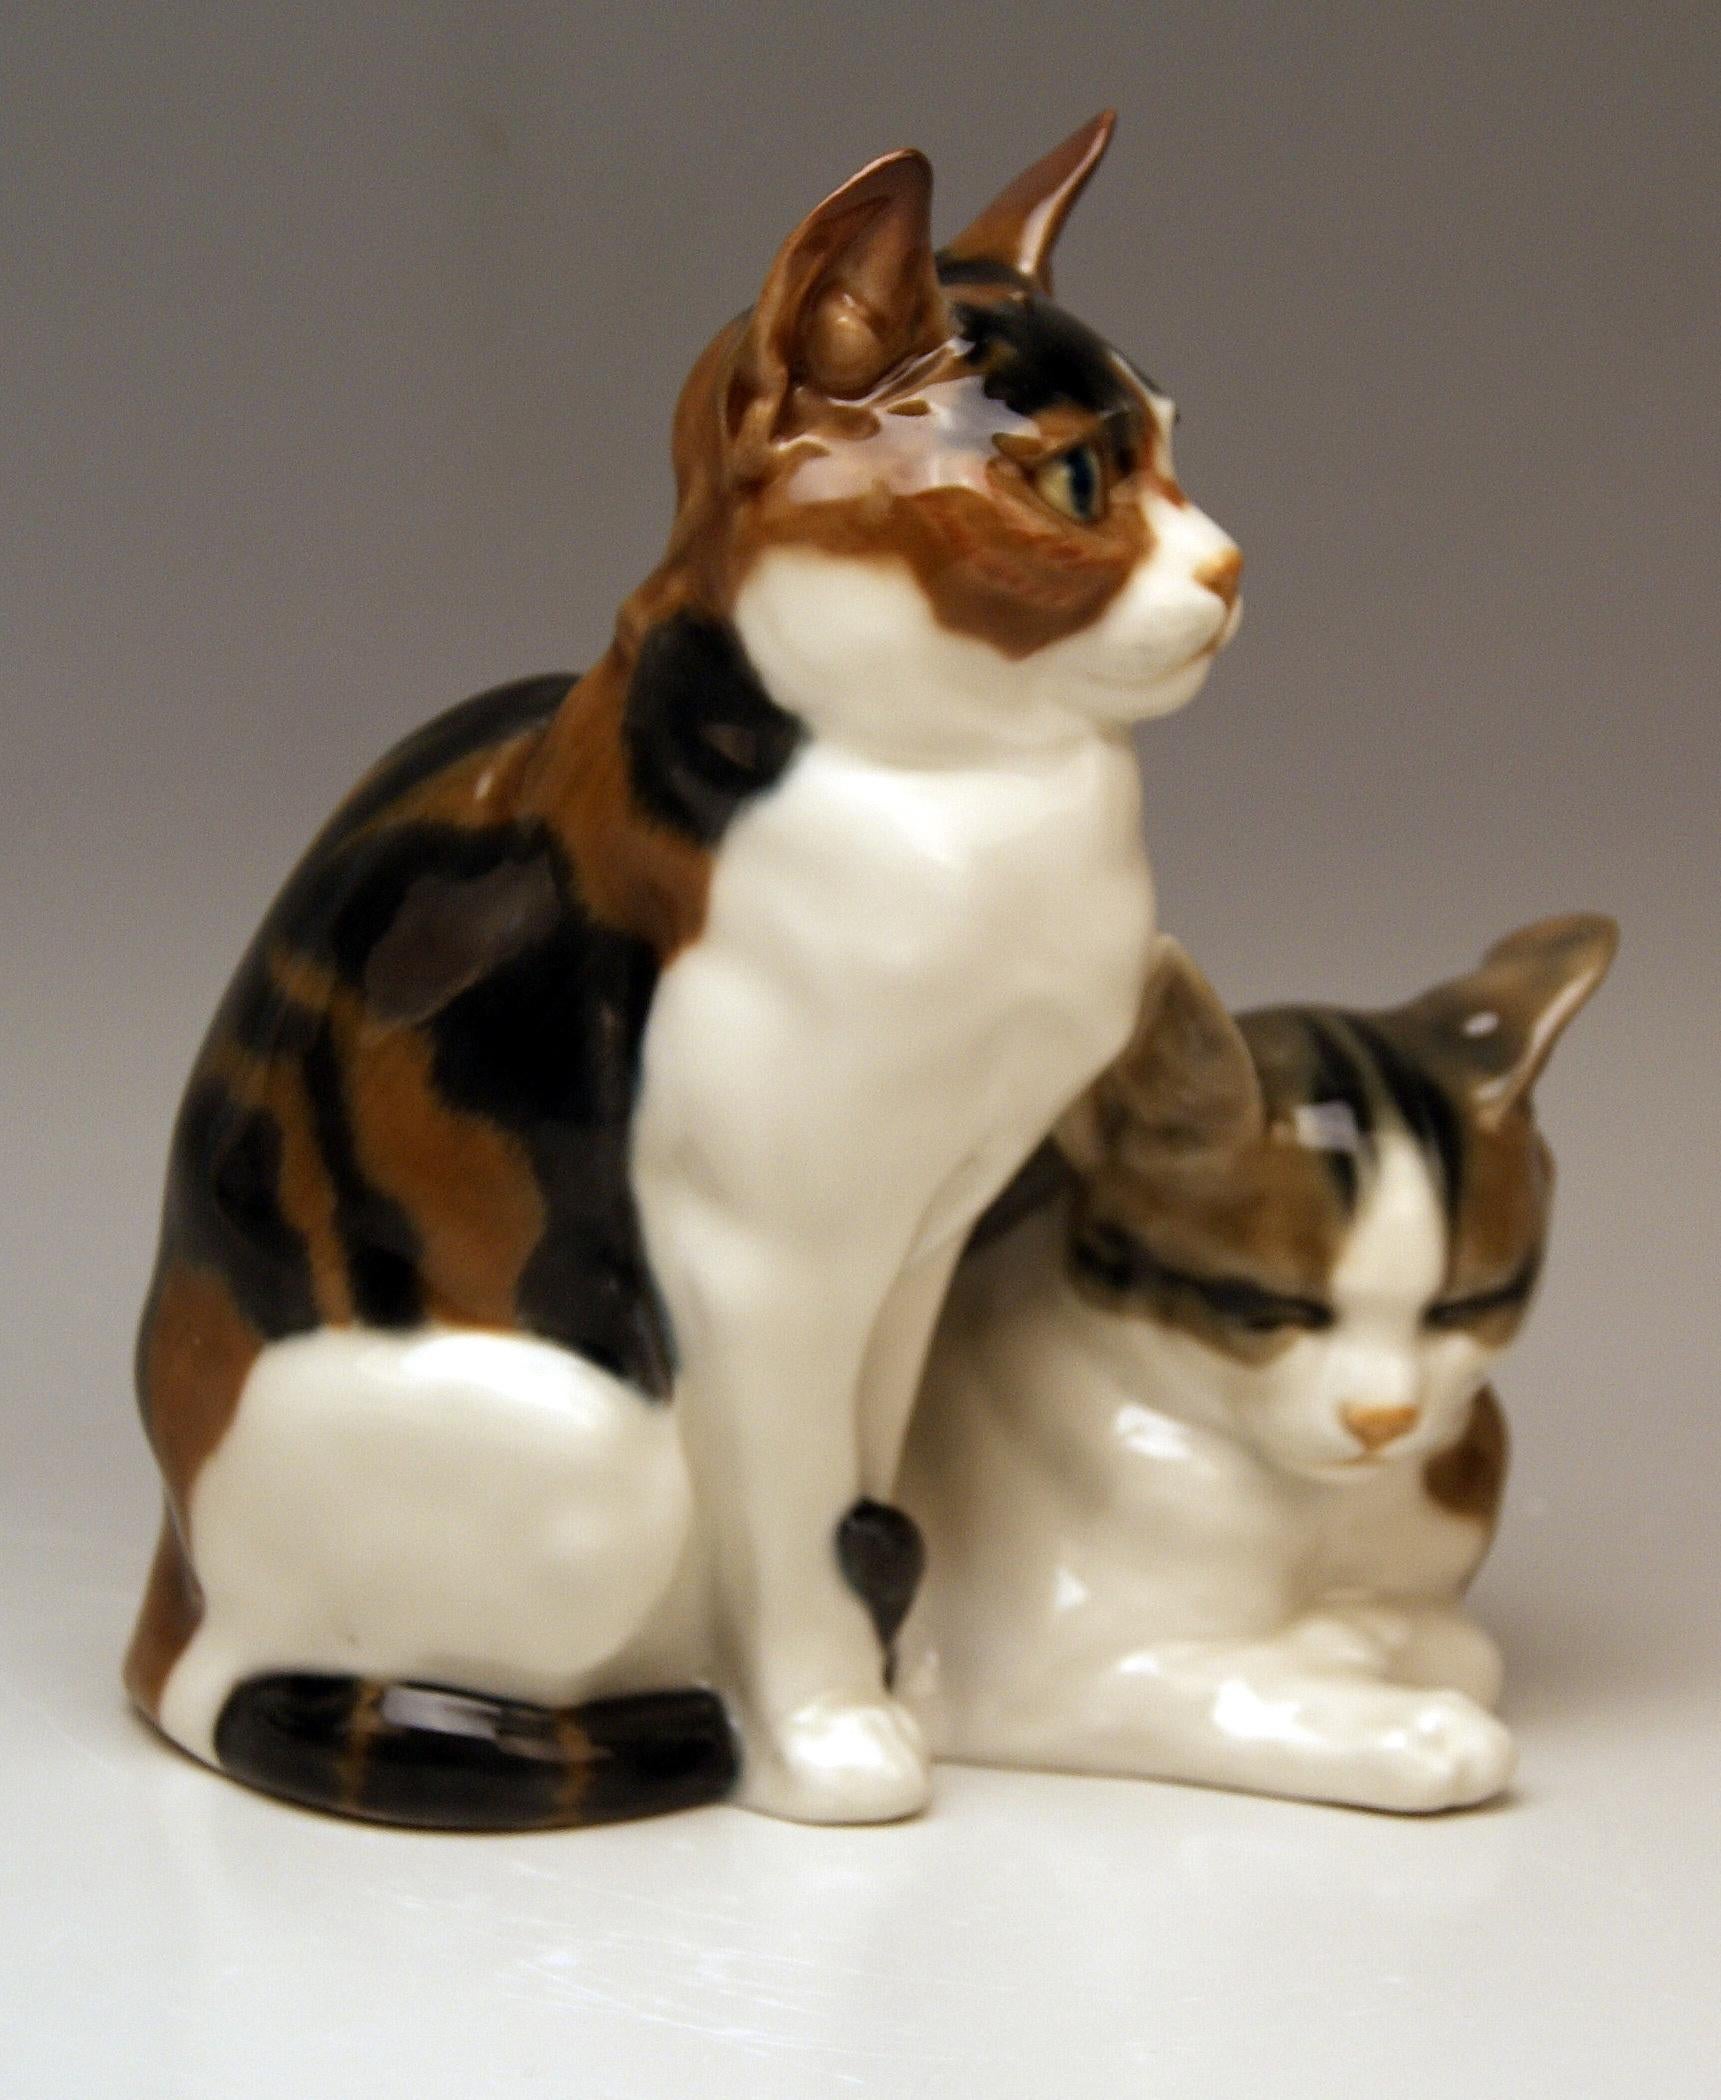 MEISSEN LOVELY PAIR OF ANIMAL FIGURINES:  PAIR OF DOMESTIC CATS
MODEL H 103

MEASURES:
height:  8.07 inches  (= 20.5 cm)
depth:   7.08 inches  (= 18.0 cm)
width:   6.29 inches  (= 16.0 cm)

Manufactory:  Meissen
Hallmarked:   Blue Meissen Sword Mark